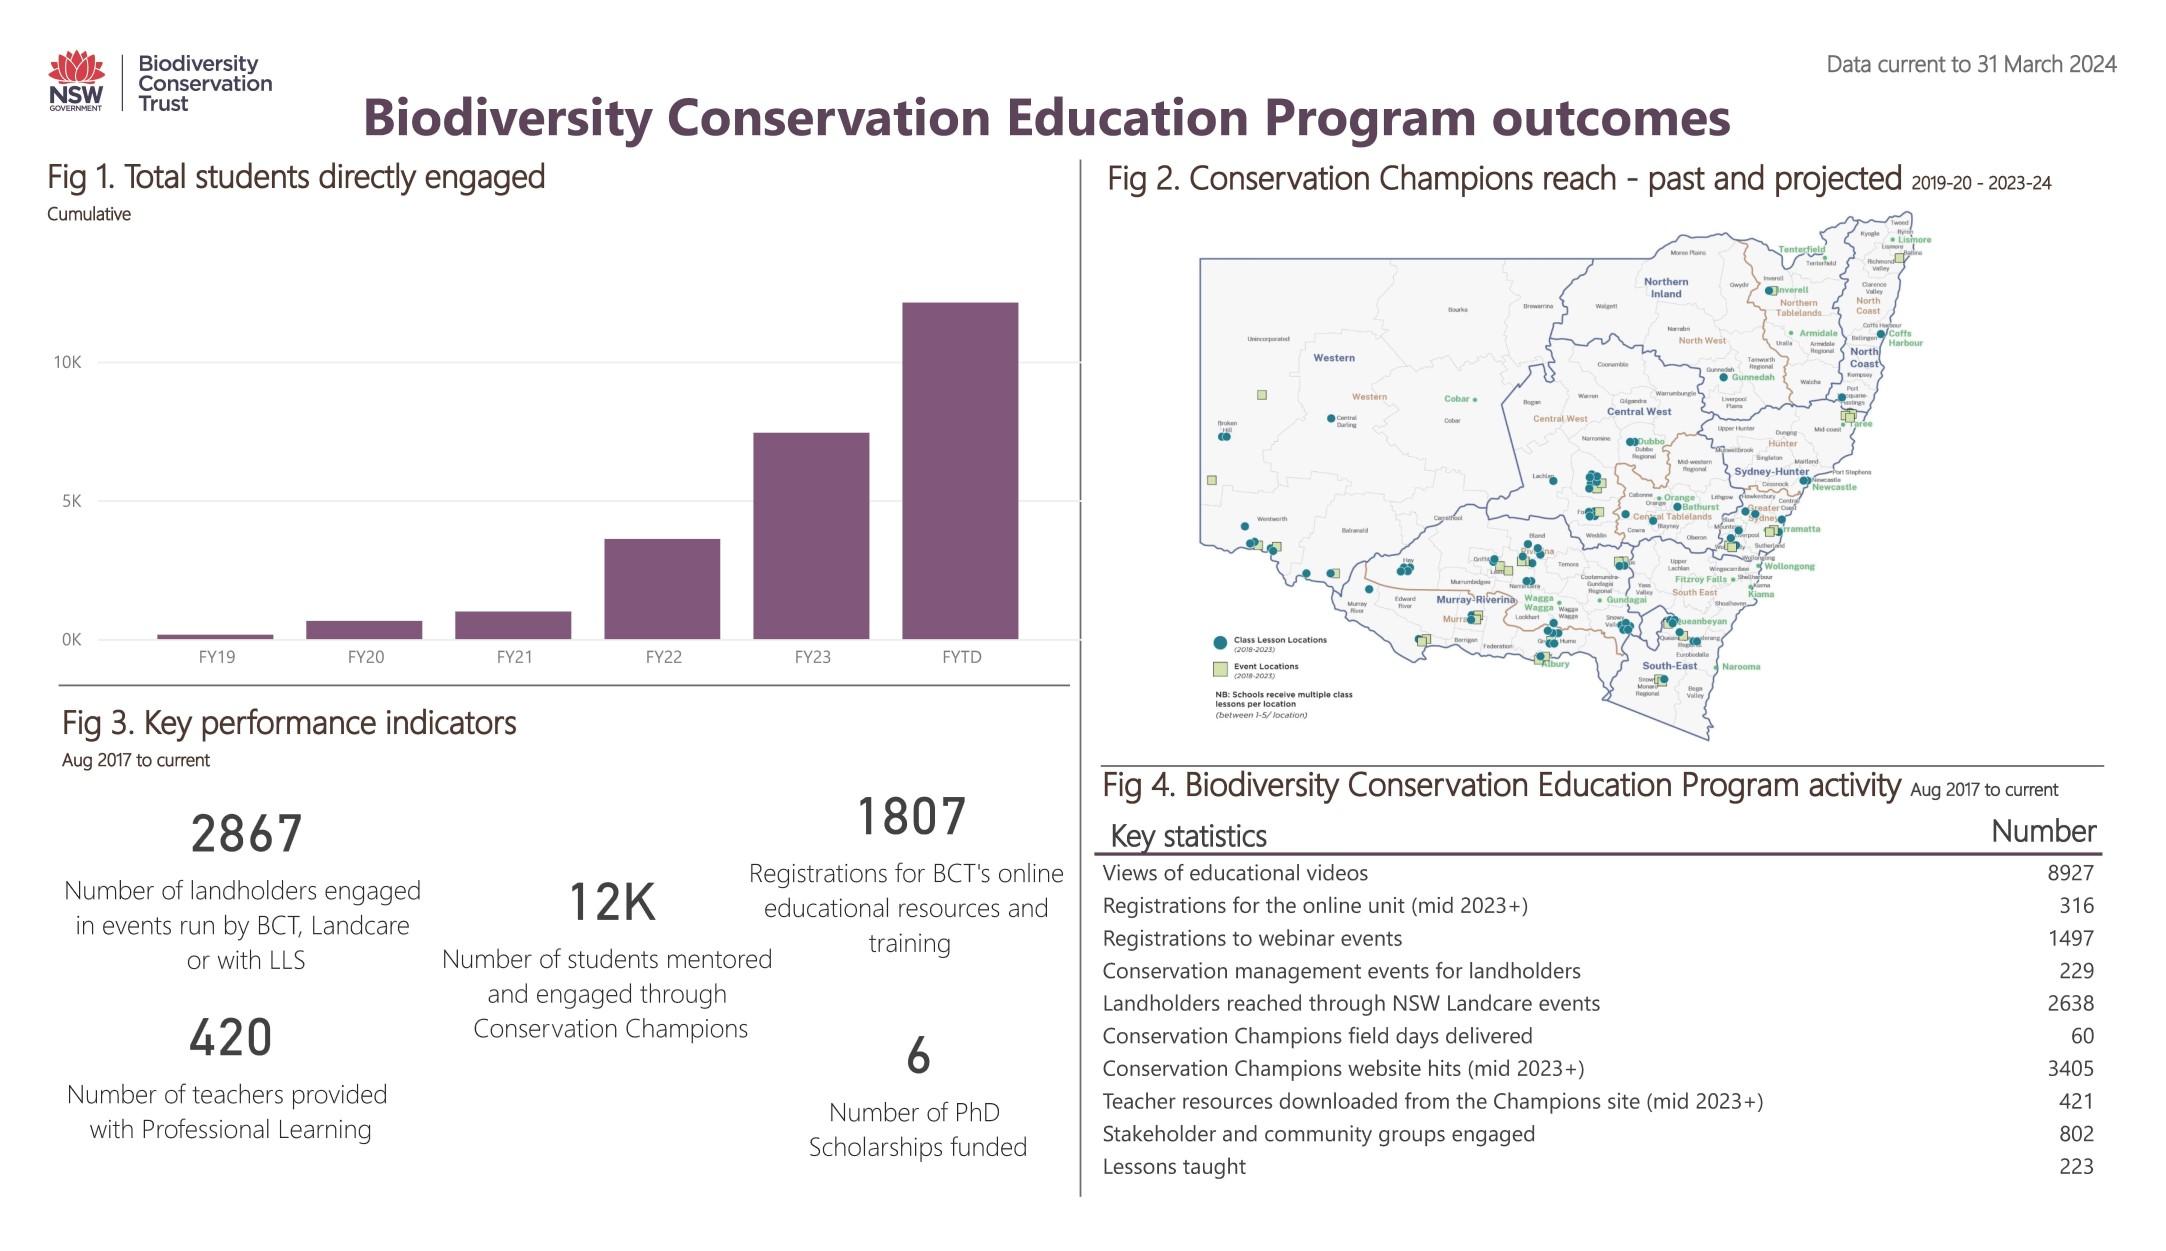 Biodiversity Conservation Education Program dashboard data as at 31 March 2024